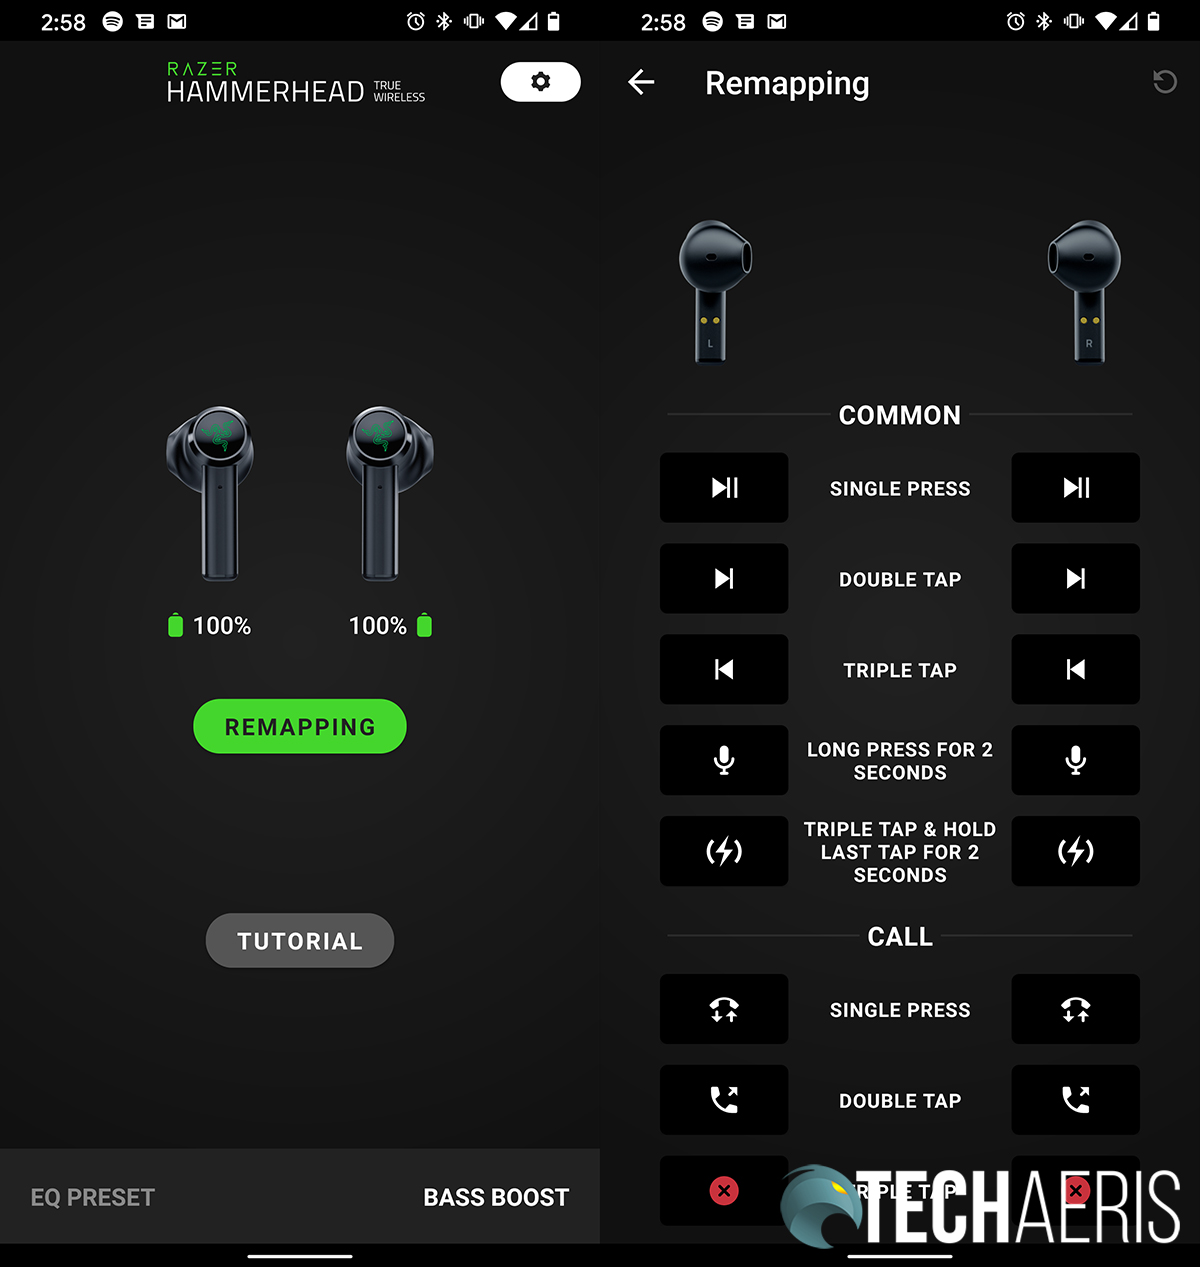 Razer Hammerhead Android app screenshots showing new remapping feature